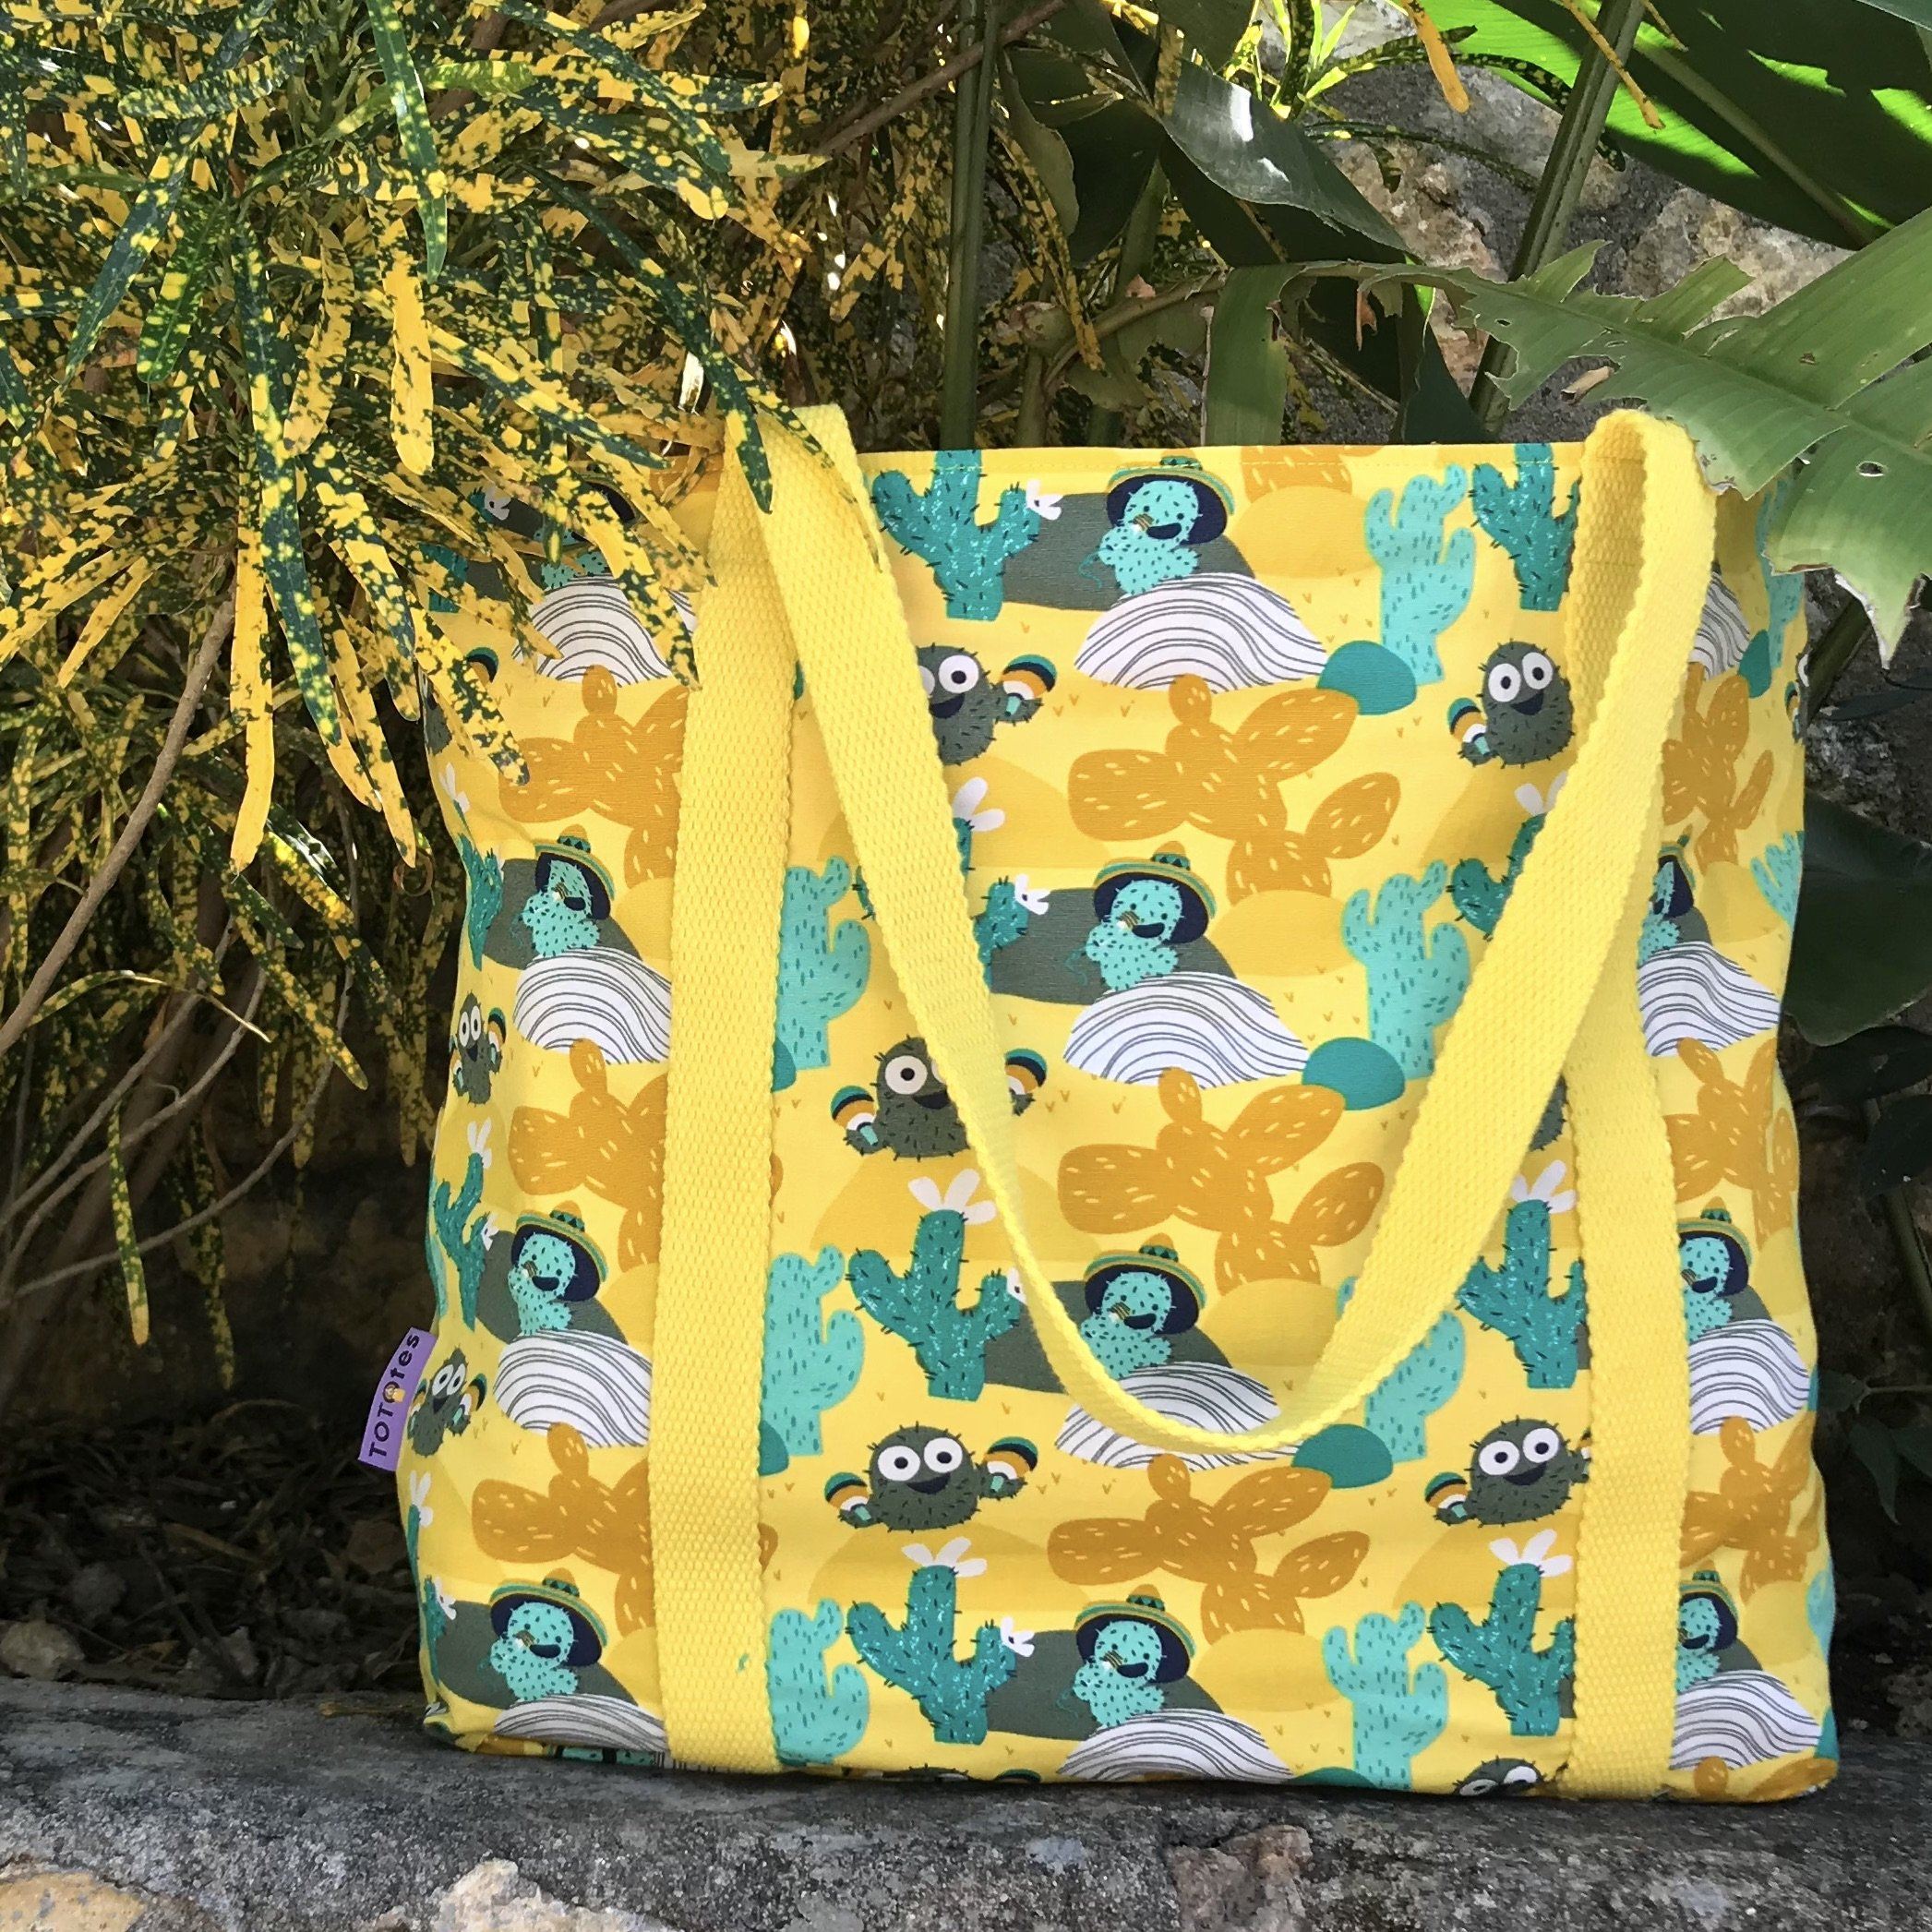 Embrace nature and the fun loving summer vibes with this bright yellow cactus print shopper bag! Just remember, if you do find yourself in the desert don’t go trying to drink water from any random cactus you see because chances are it’ll just give you some seriously bad indigestion! So stay hydrated, grab this awesome bag and go out there and have a blast!